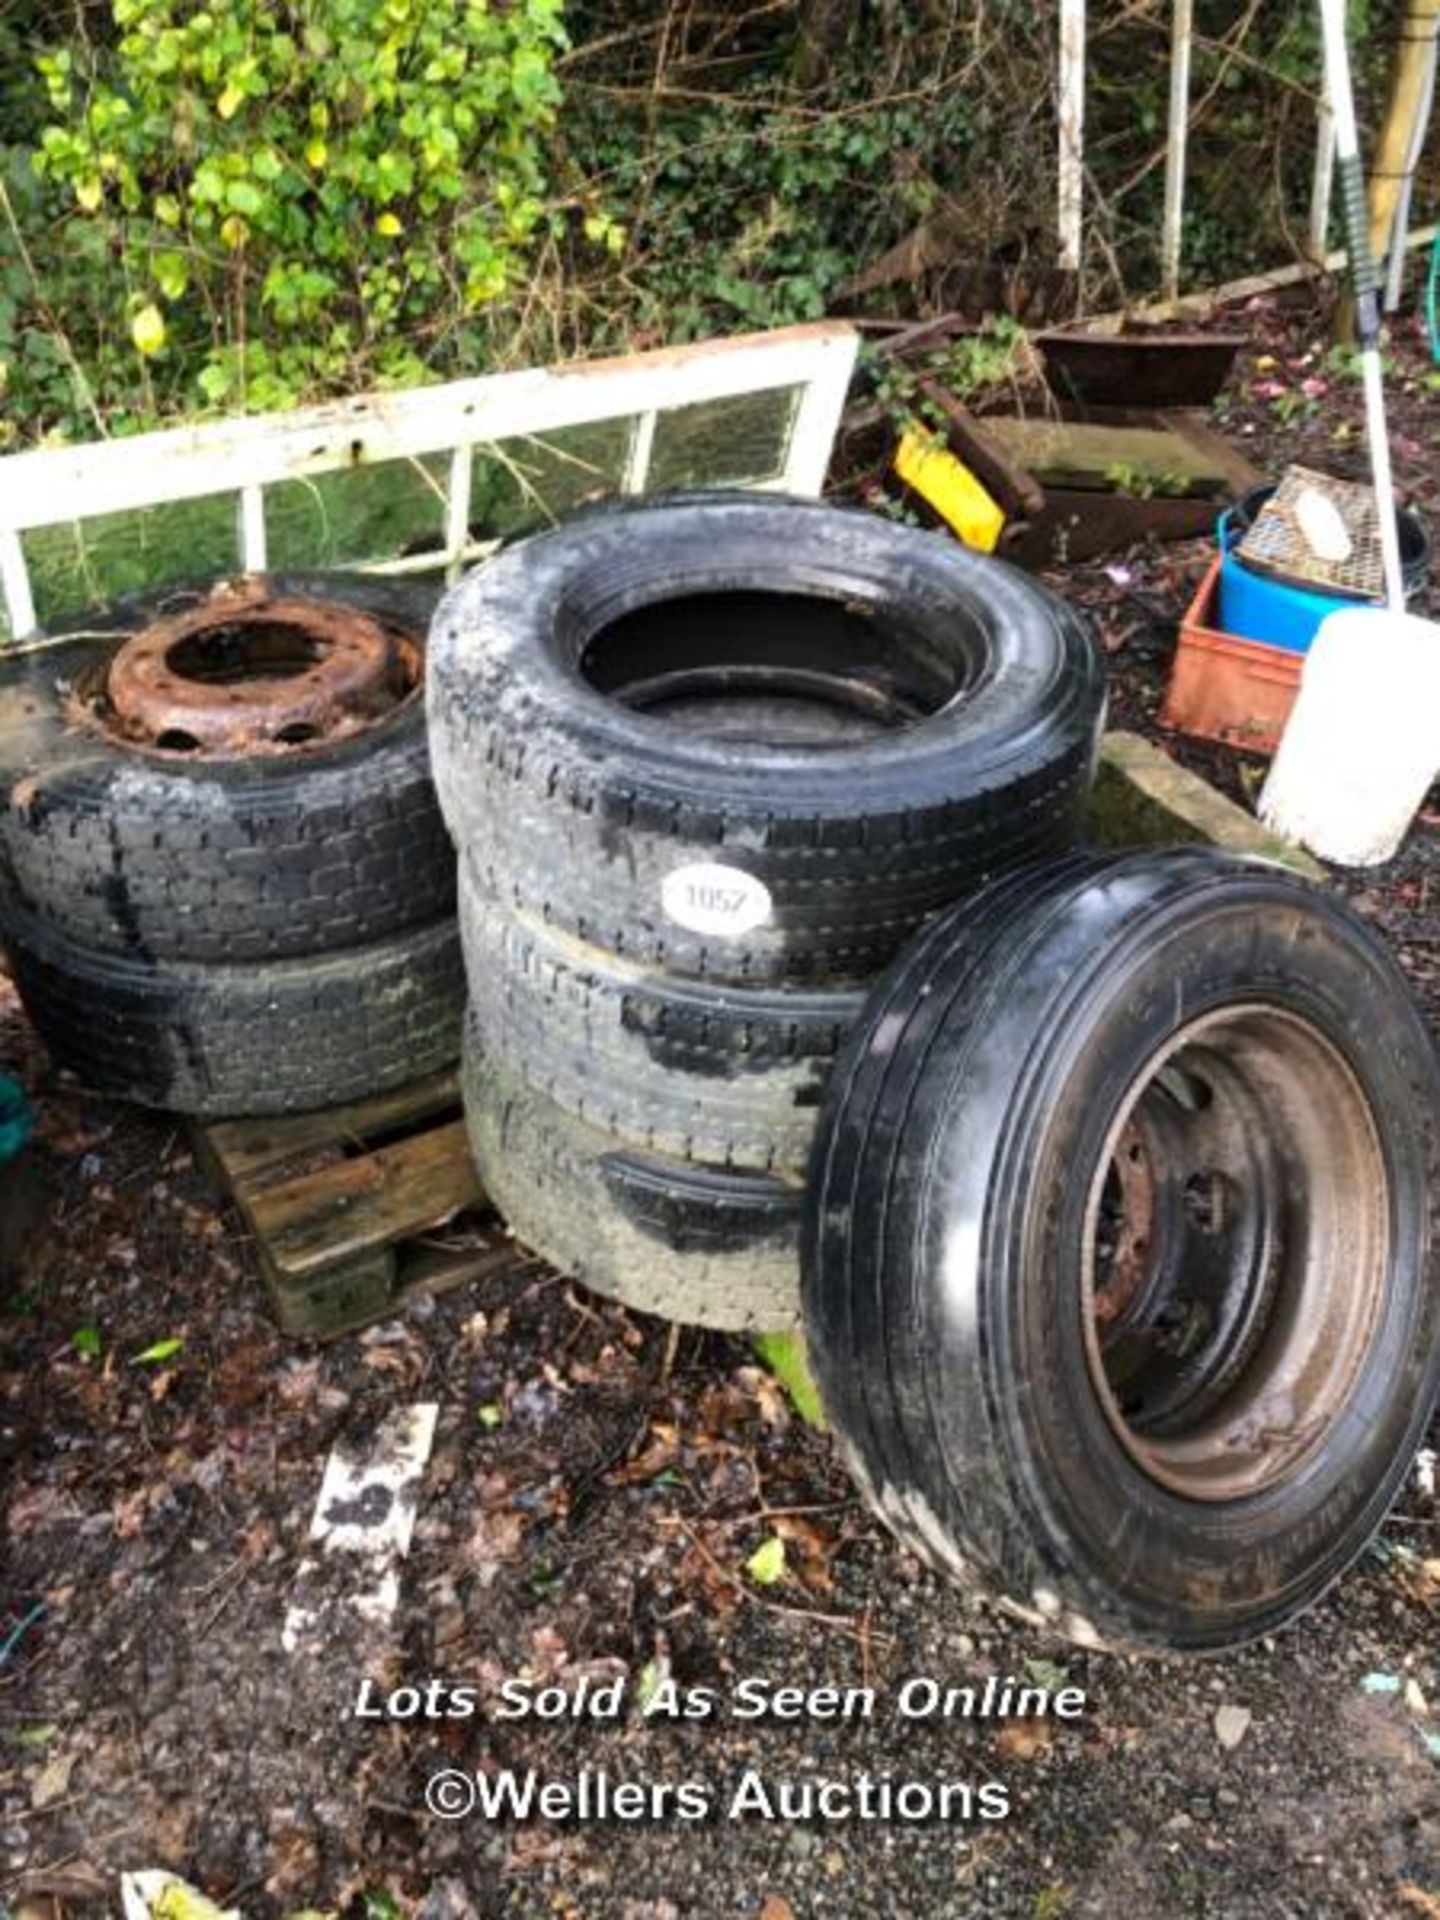 6X WHEELS AND TYRES 24570X17.5 AND 3X TYRES / NO VAT ON HAMMER PRICE - Image 2 of 5